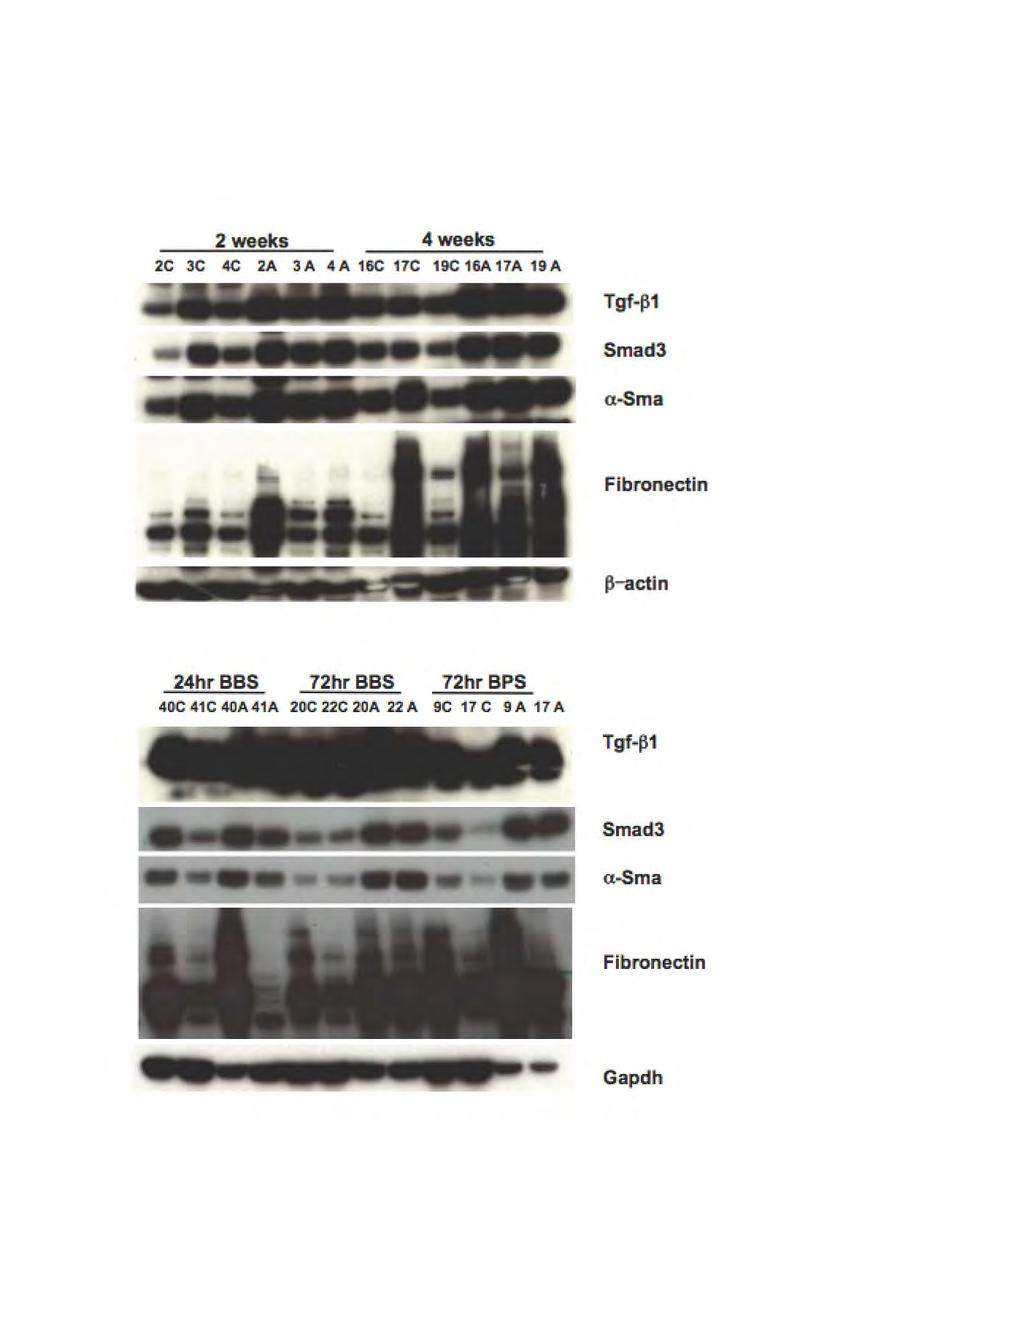 IMPORTANT this page contains unpublished data that should be protected 3. Biomarker expression of animal biopsy specimens by western blot (provided by Nesti partner lab).